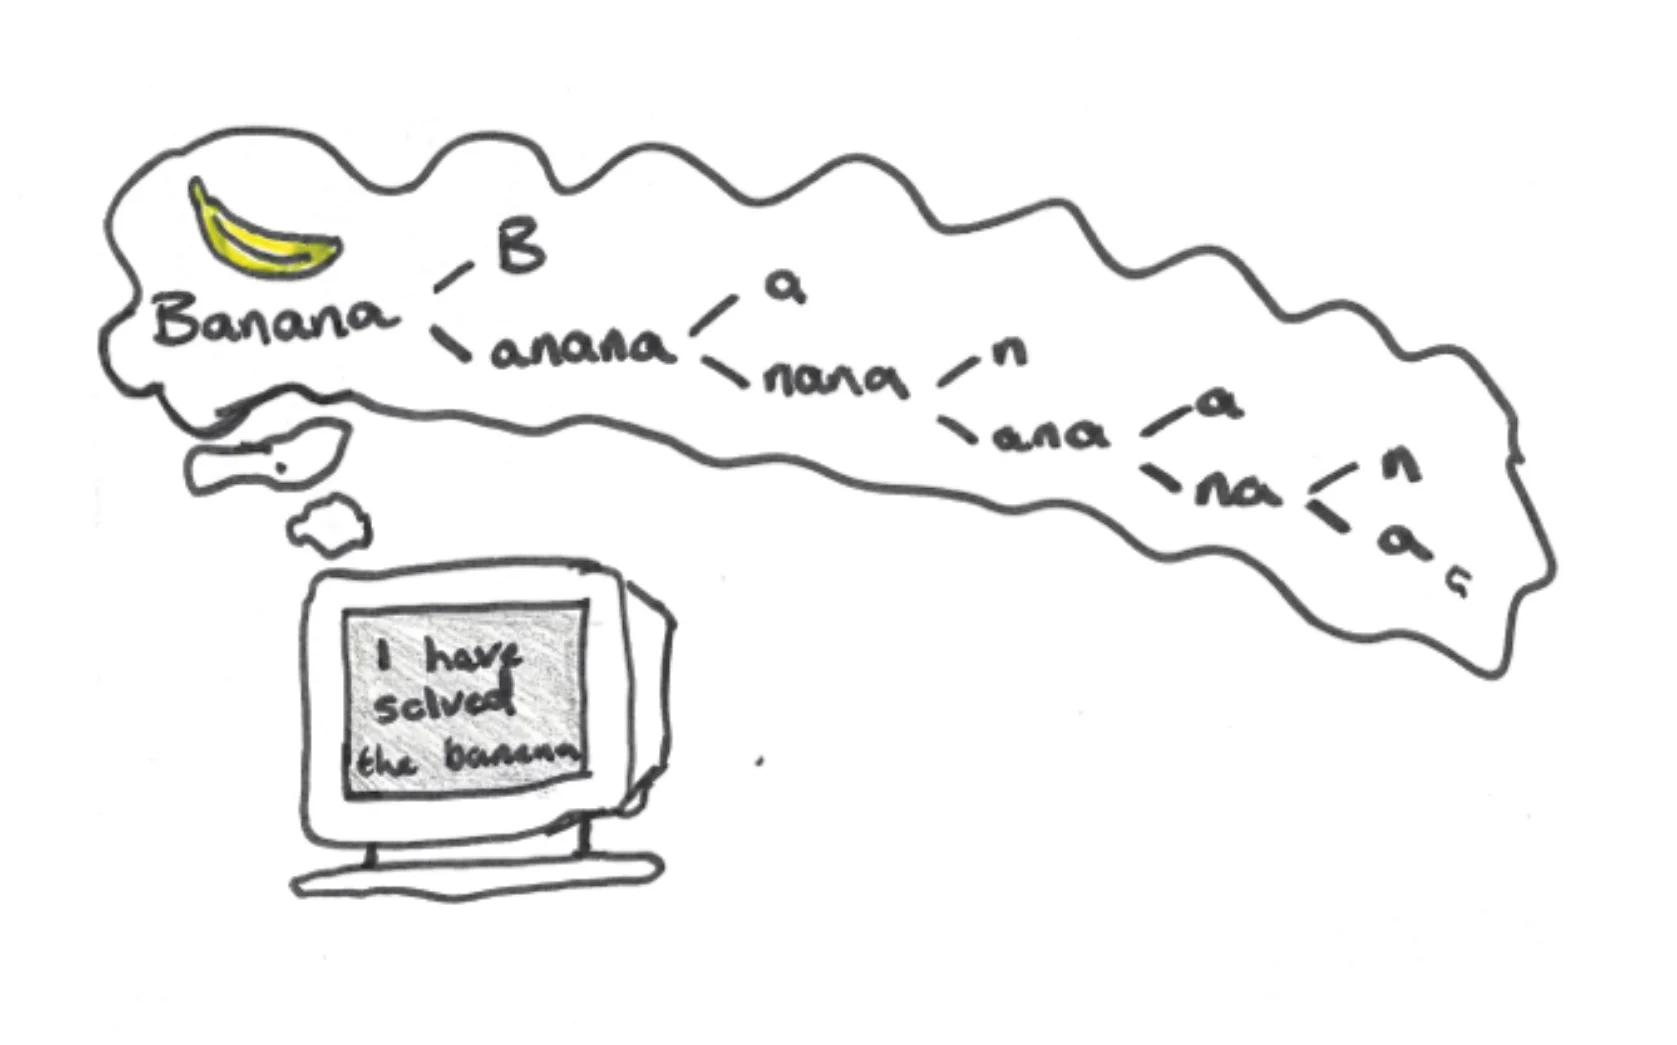 A computer with the words "I have solved the banana" written on it, with a thought bubble leaving the computer which contains the word banana and an image of the banana, and then branches off this breaking down the word "banana" into its component letters. 